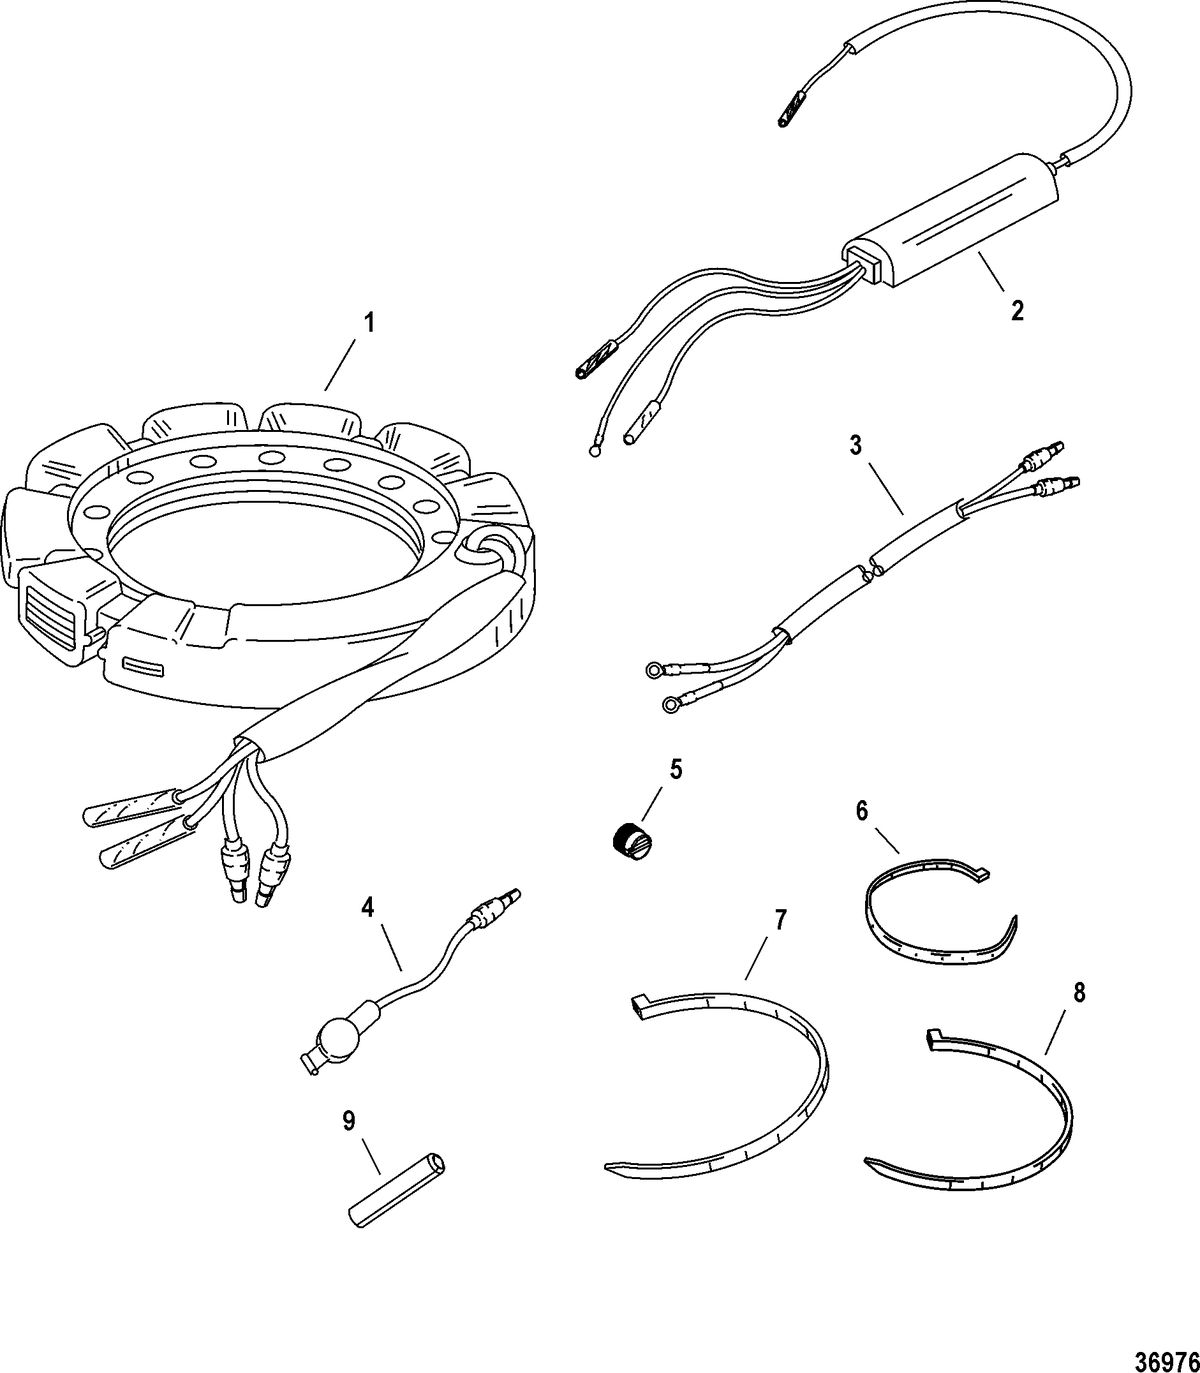 ACCESSORIES ELECTRICAL COMPONENTS AND HARNESSES Ignition Stator Kit, 3 Cylinder (832075A19)